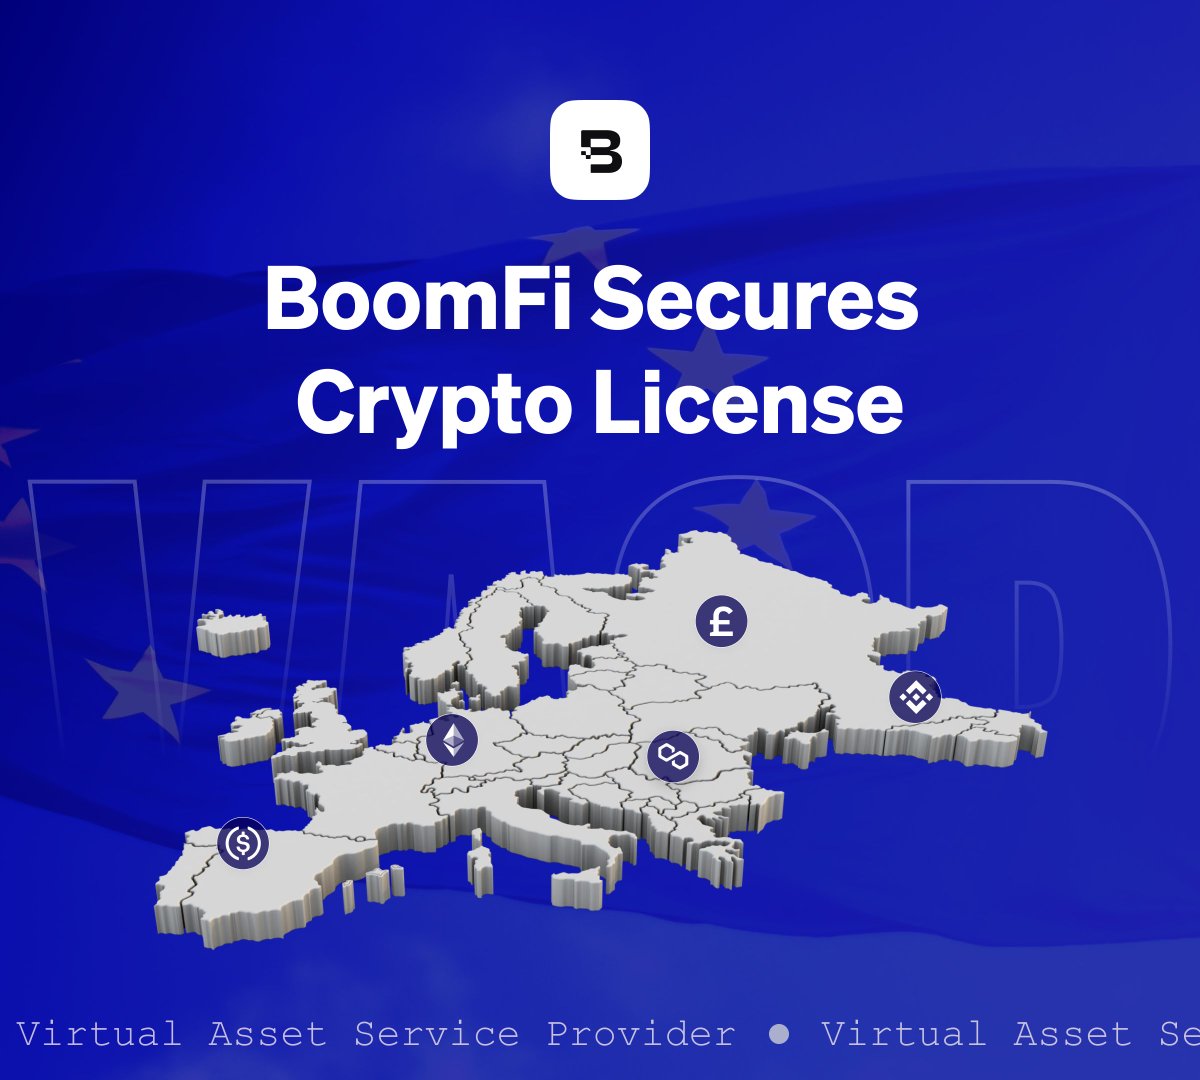 💥 We're thrilled to announce that we have secured registration as a Virtual Asset Service Provider (VASP) to service businesses in Europe. As a VASP, we will start facilitating exchange between virtual currencies and fiat currencies, which is crucial for further expansion of